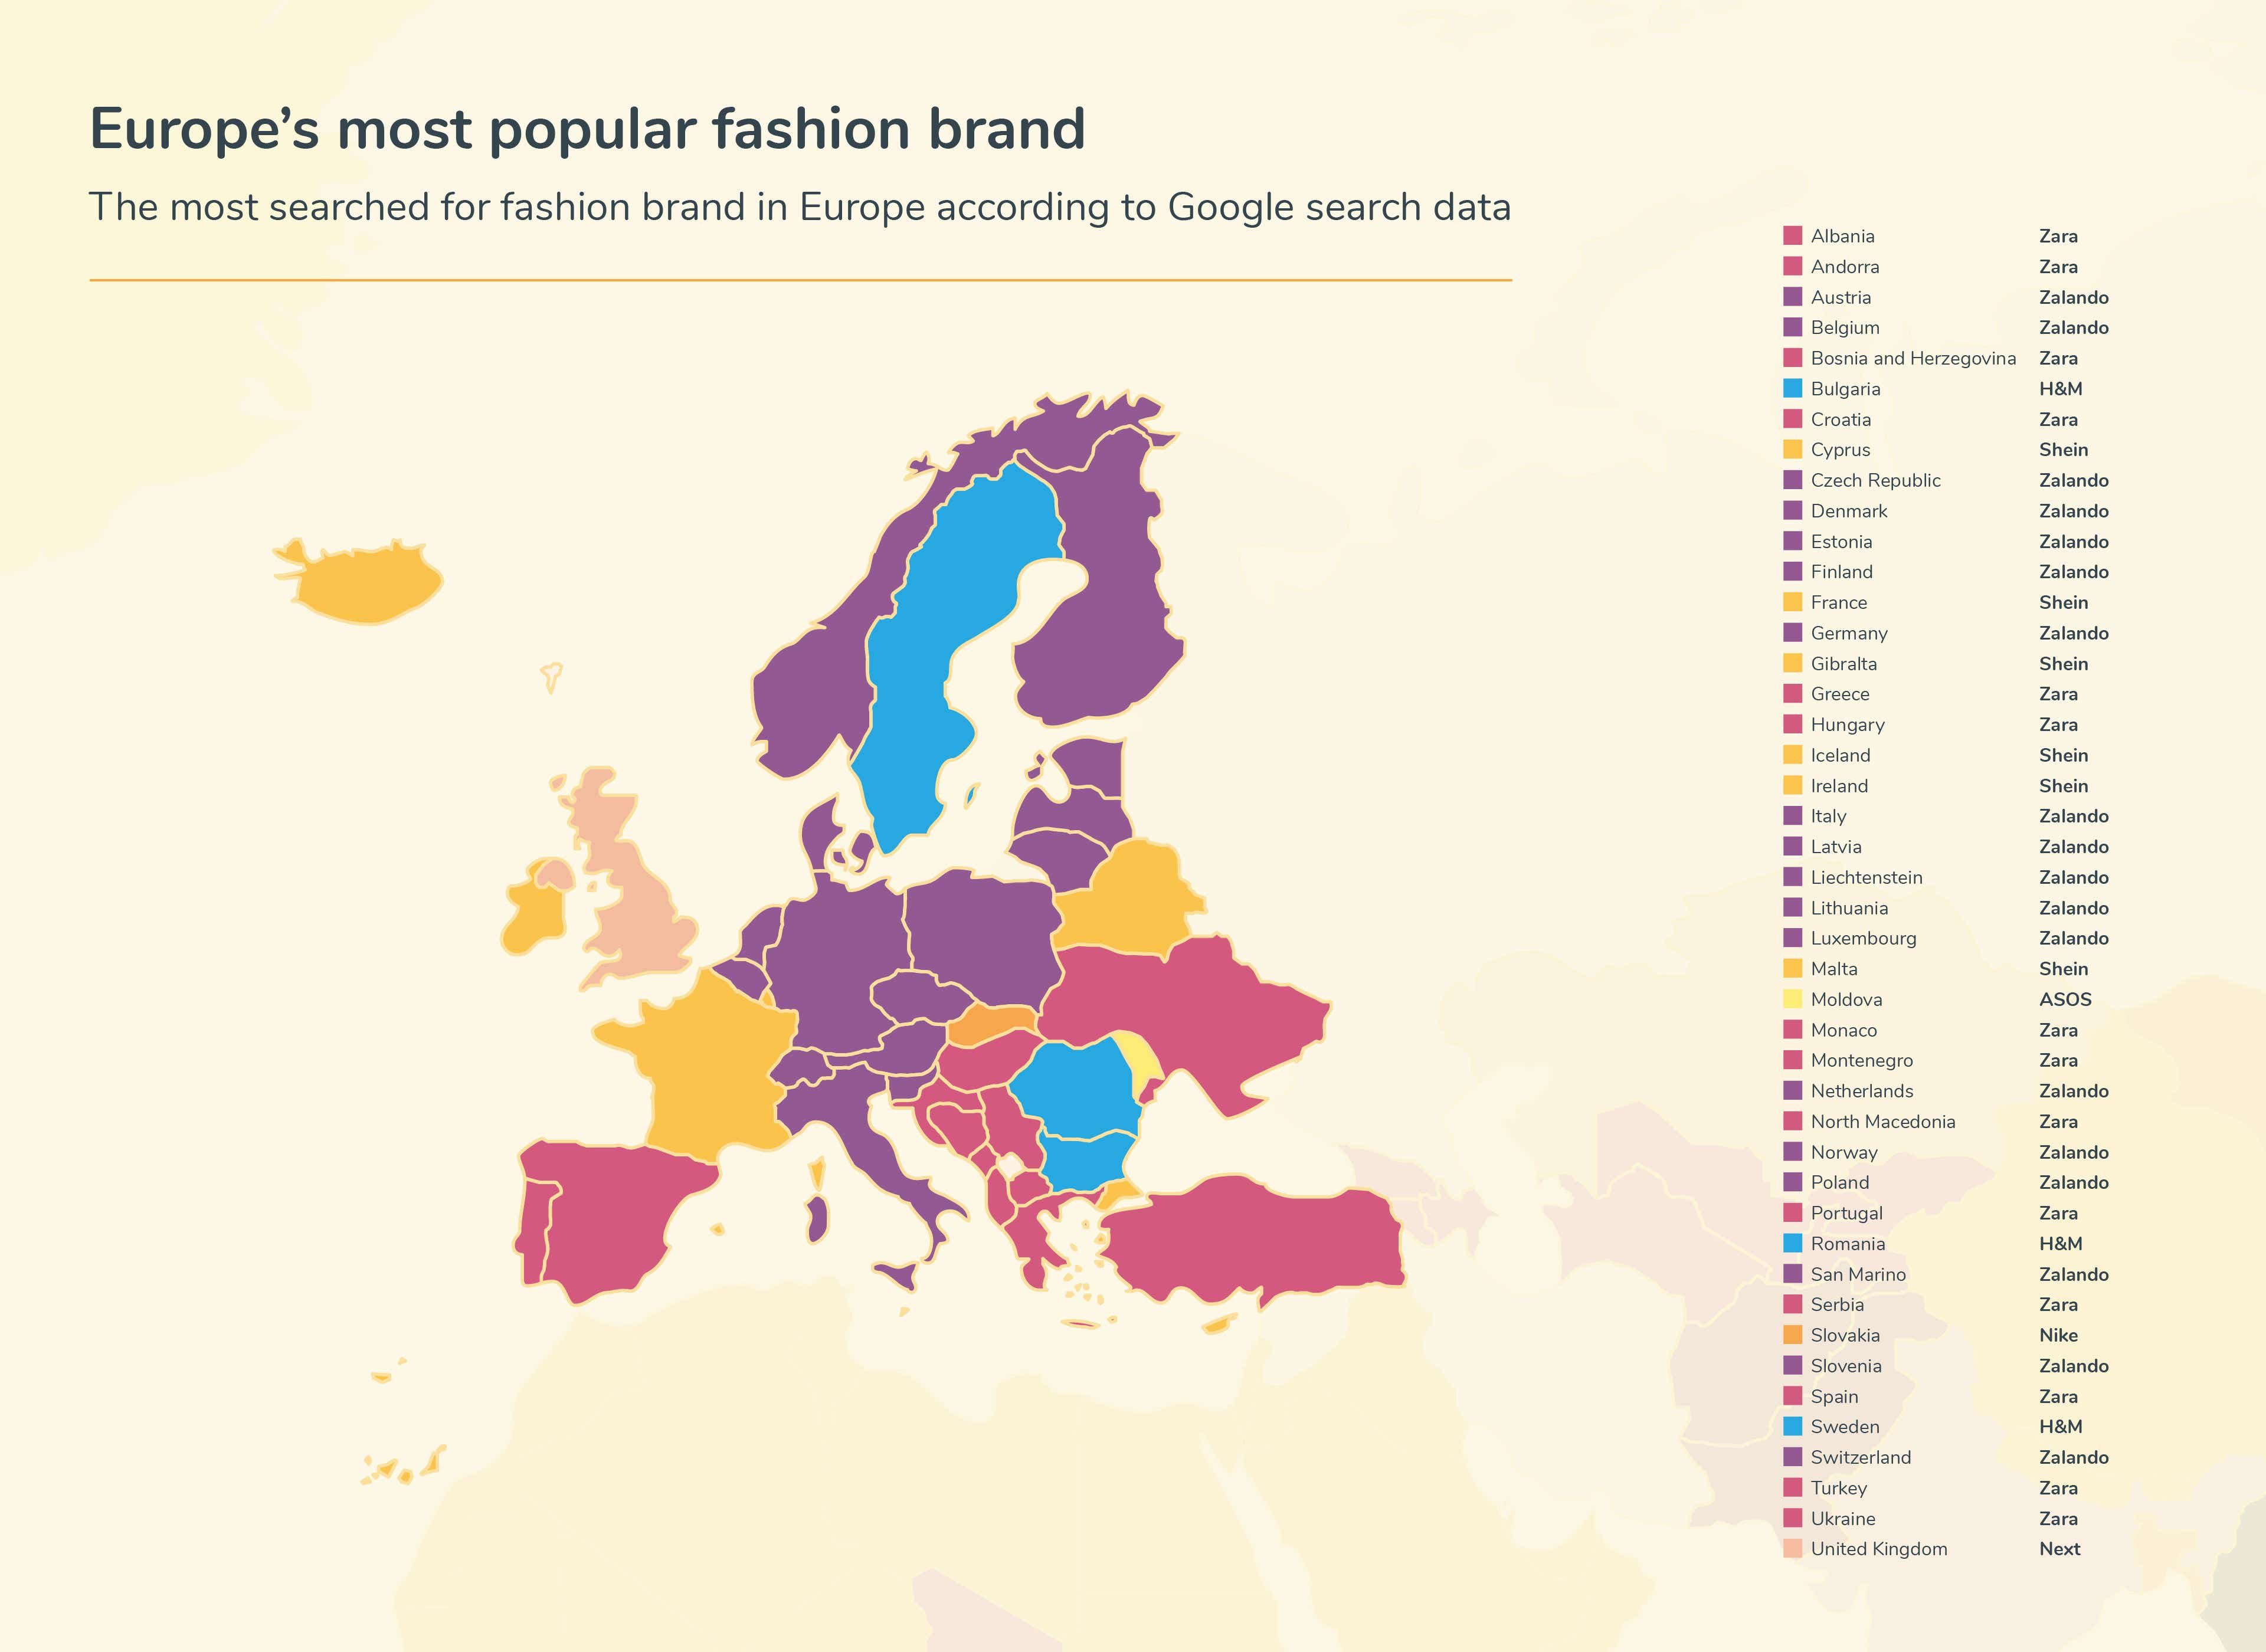 Research shows Zara to be the most Googled fashion brand in the world